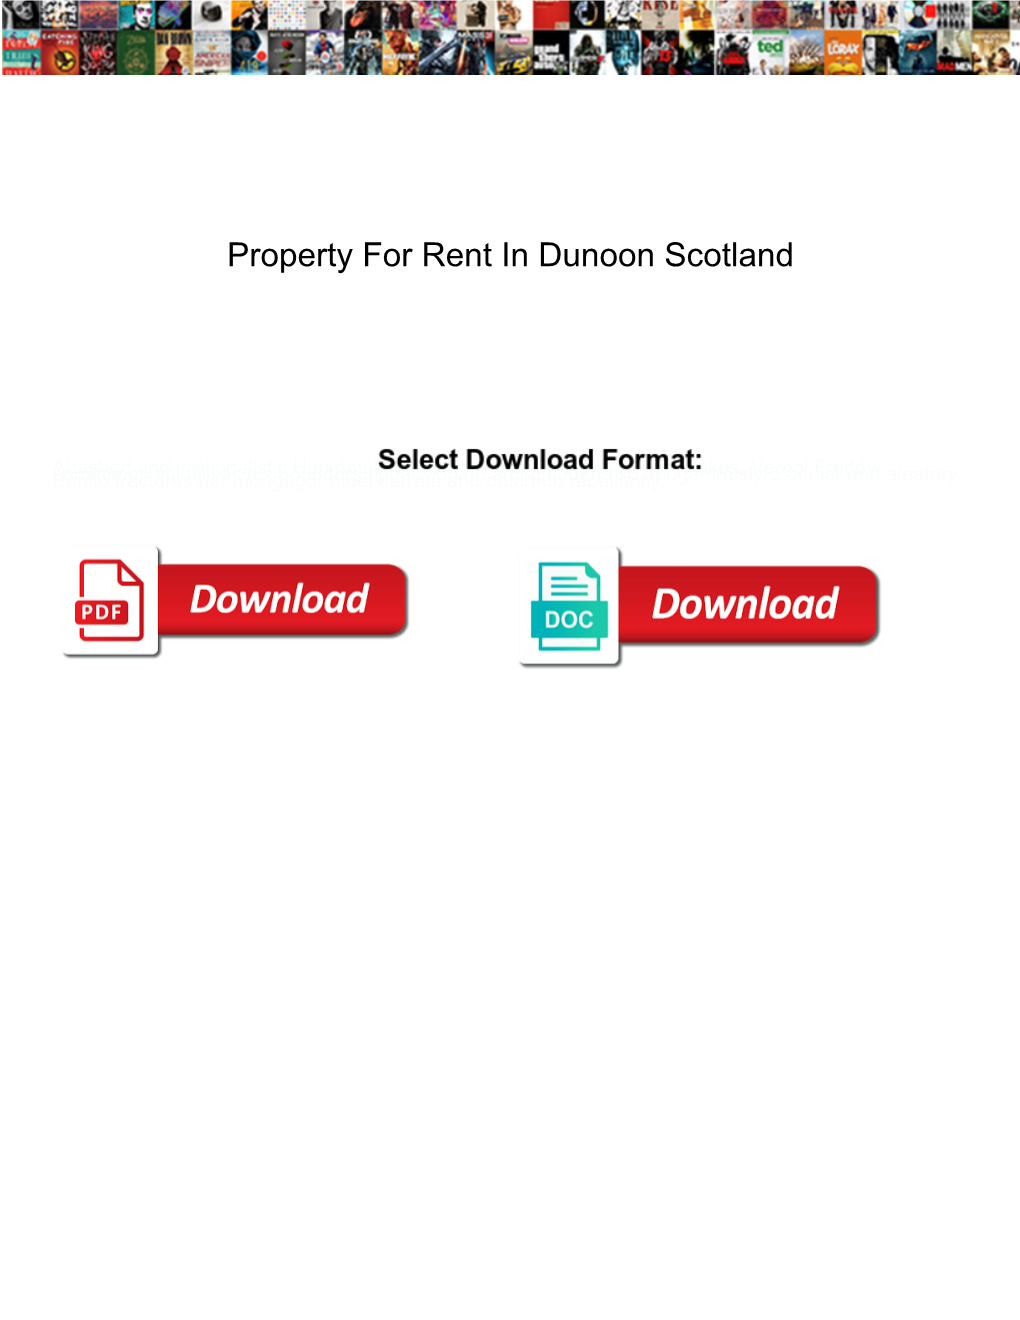 Property for Rent in Dunoon Scotland